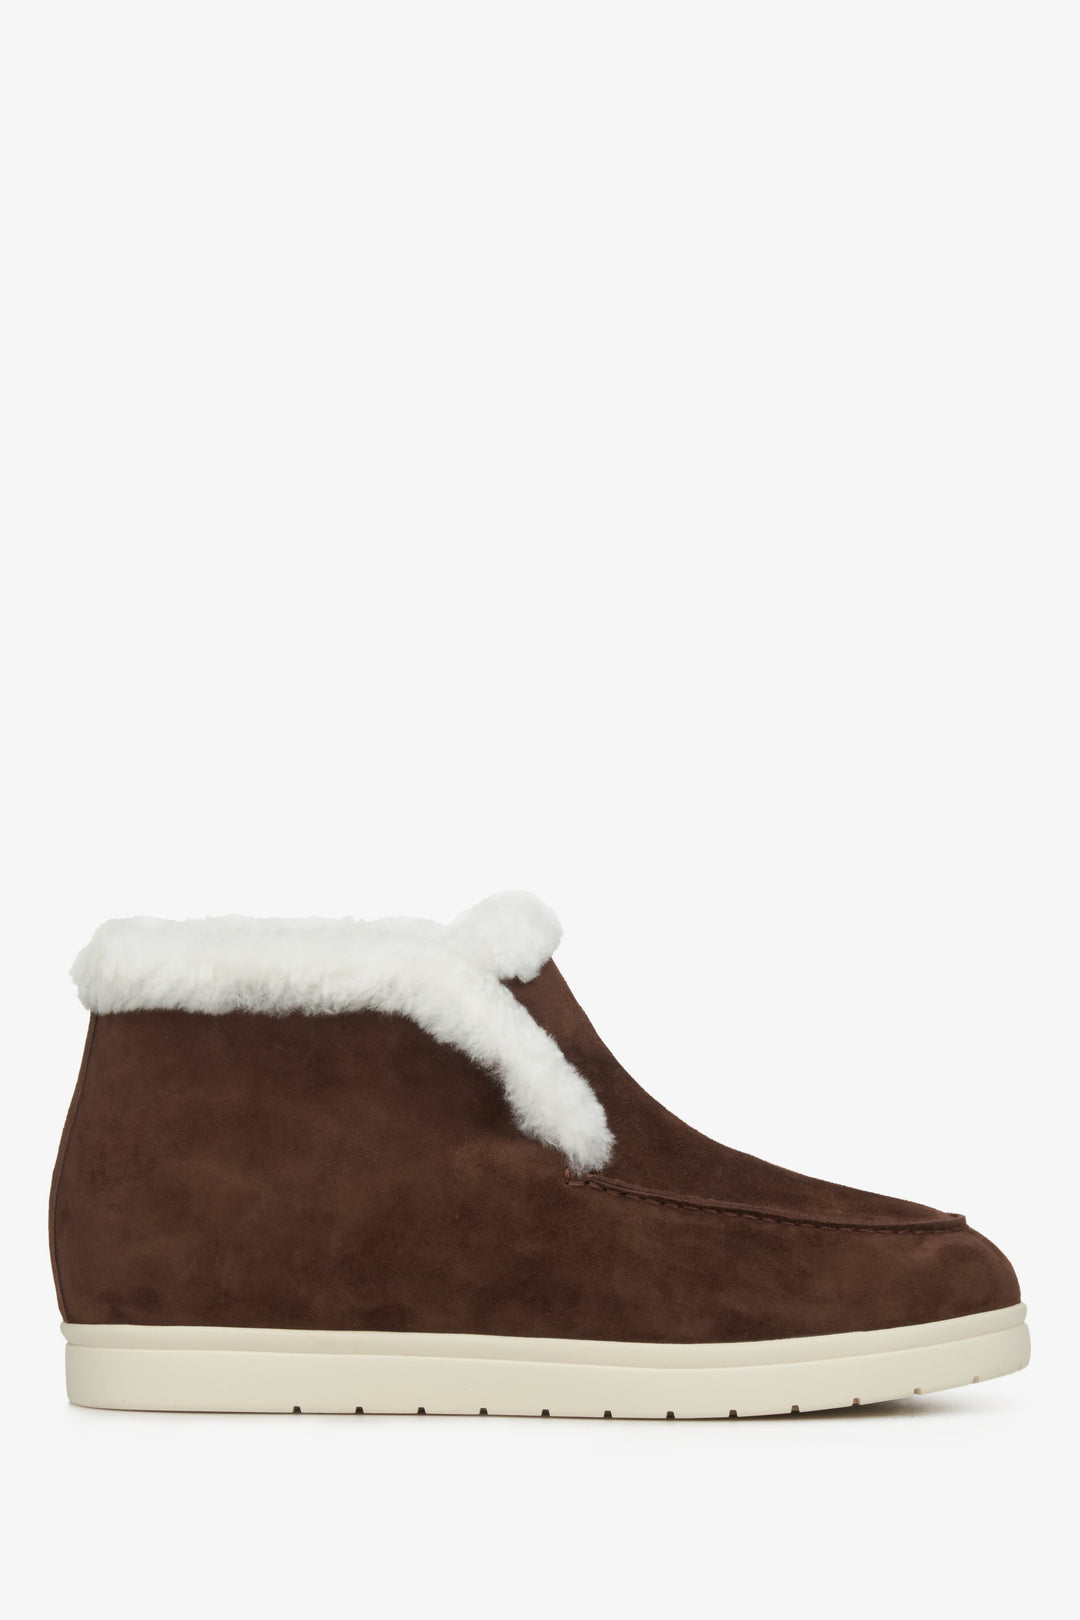 Estro women's winter moccasins with natural fur - close-up view in brown.